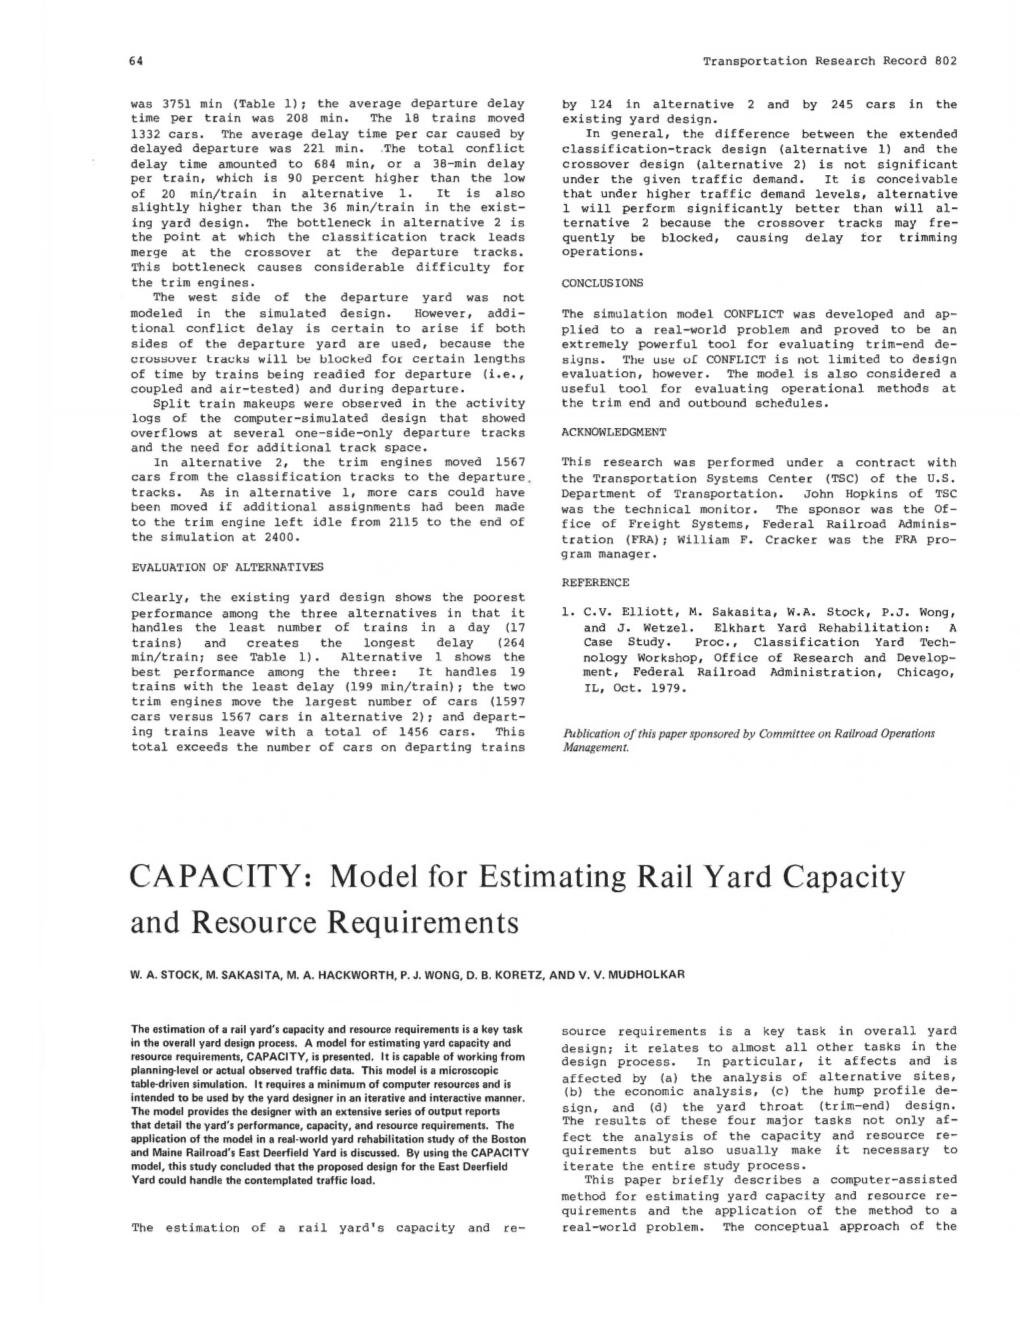 Model for Estimating Rail Yard Capacity and Resource Require1nents